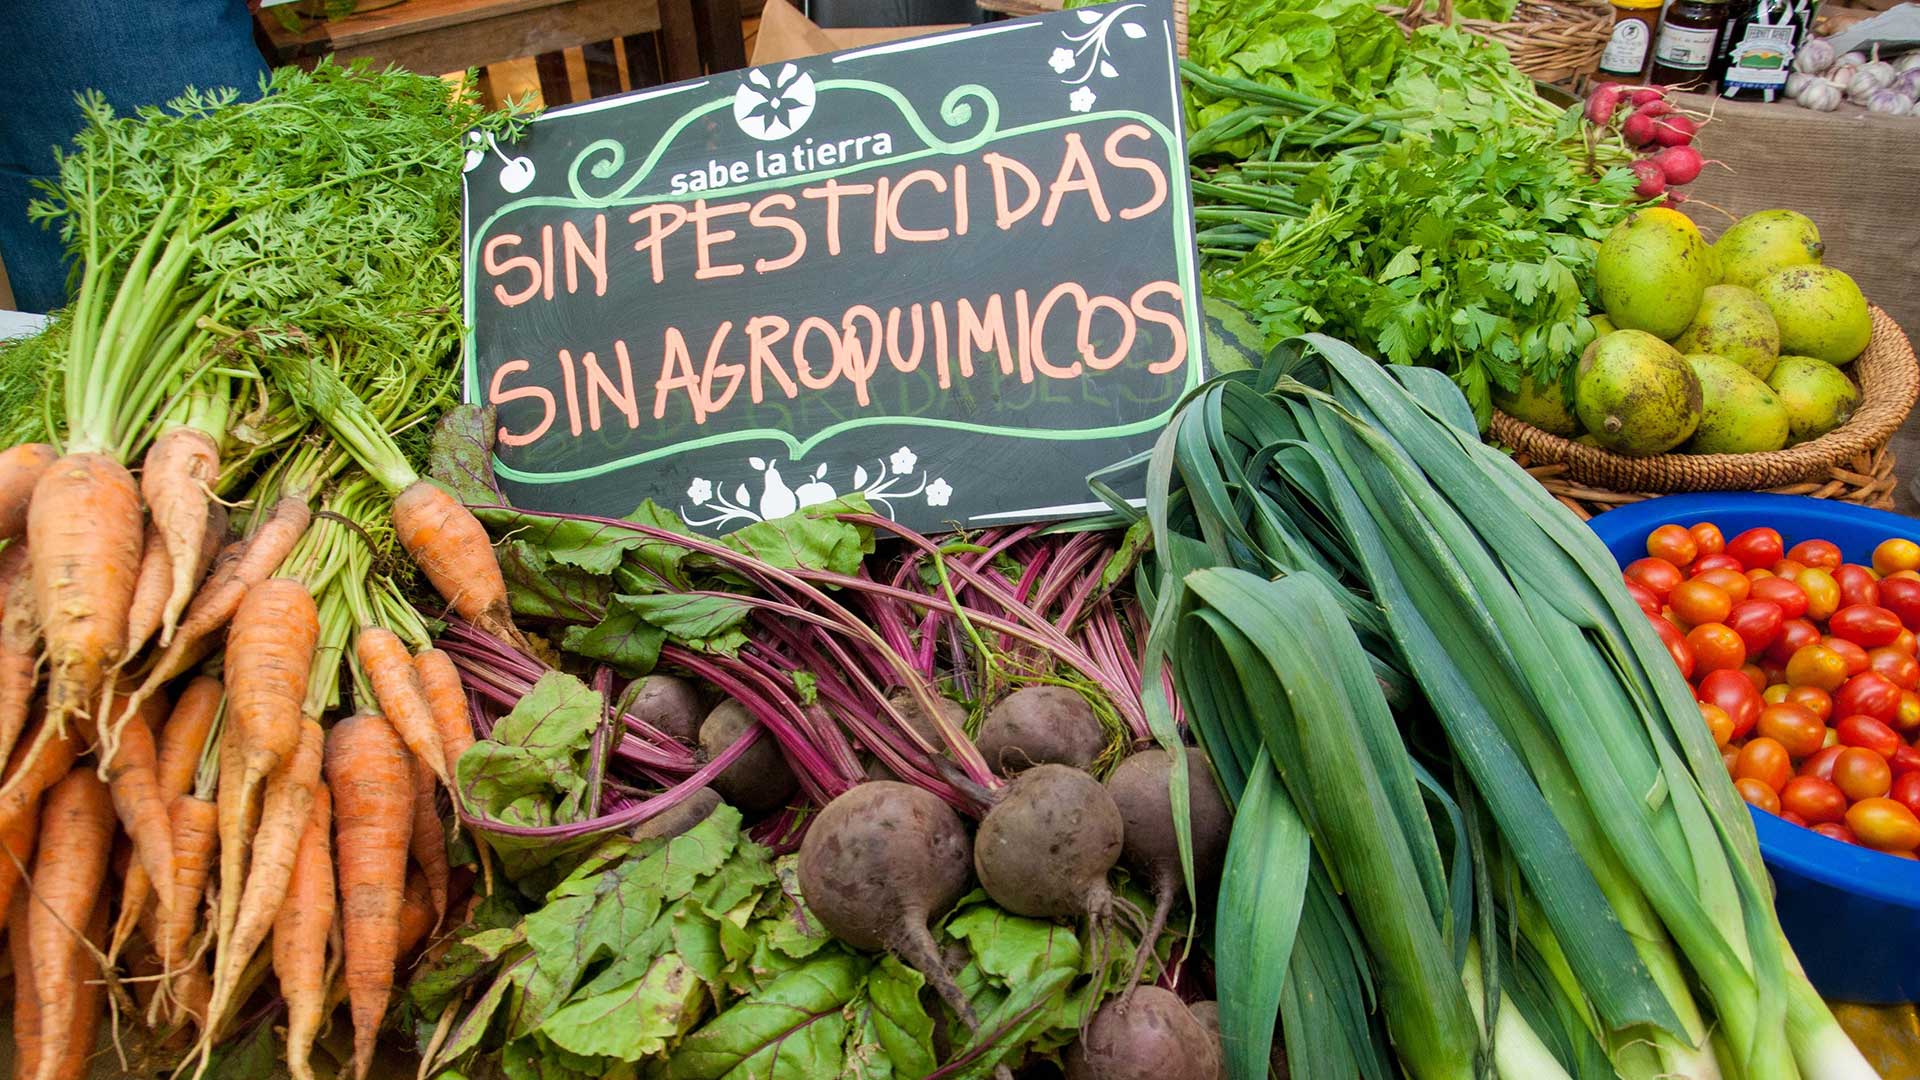 <p>A sign at a market in Buenos Aires indicates that vegetables were produced without pesticides and agrochemicals (image: Fermín Koop)</p>